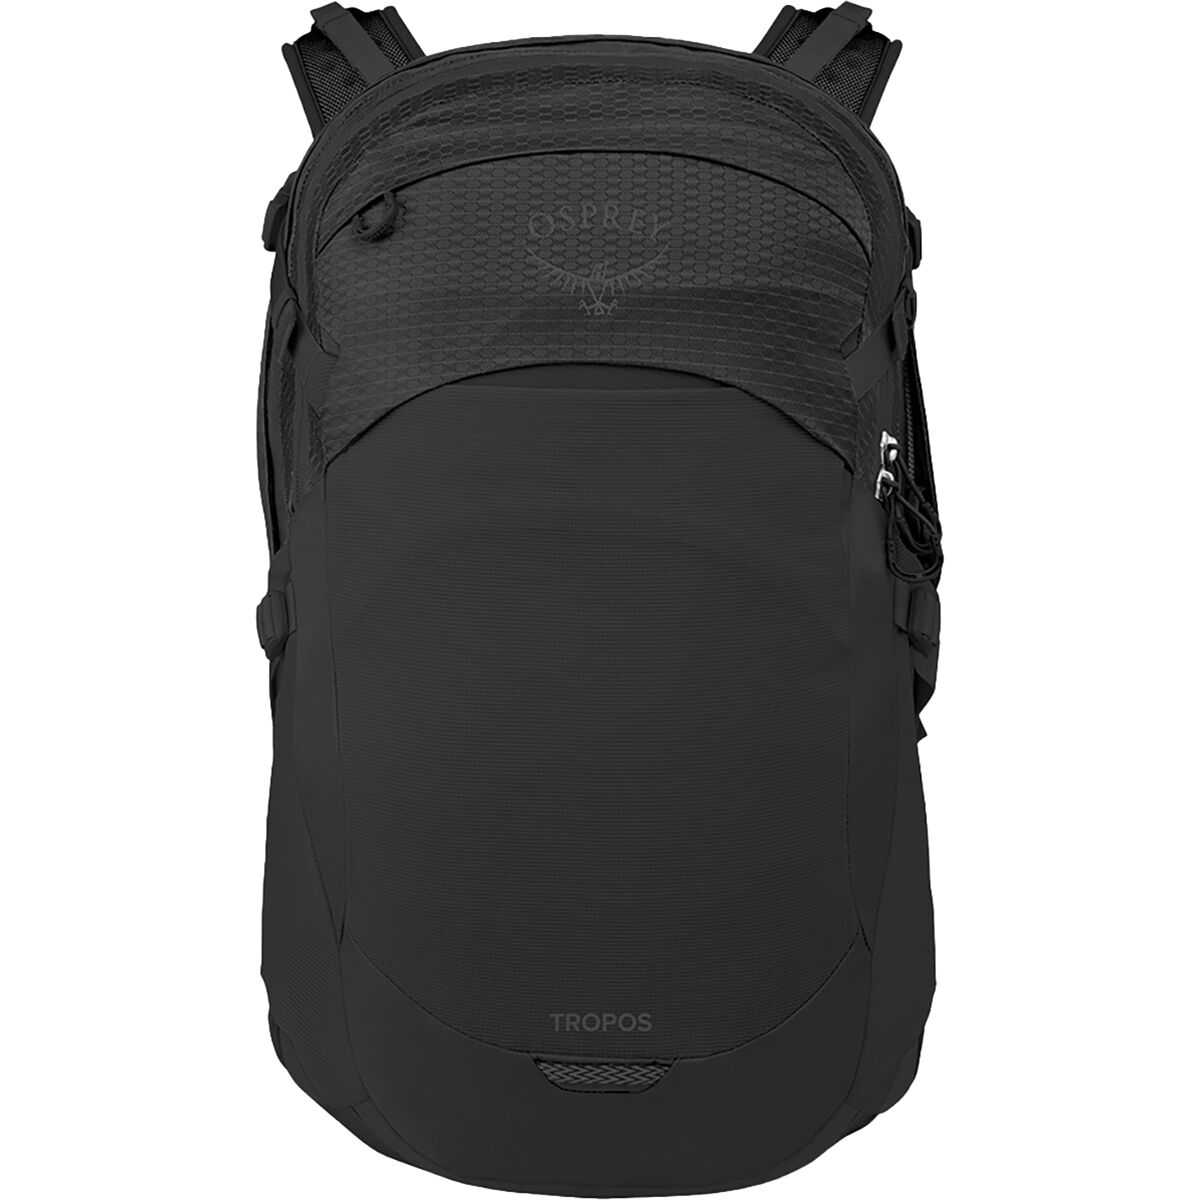 Osprey Packs Tropos 32L Backpack - Accessories